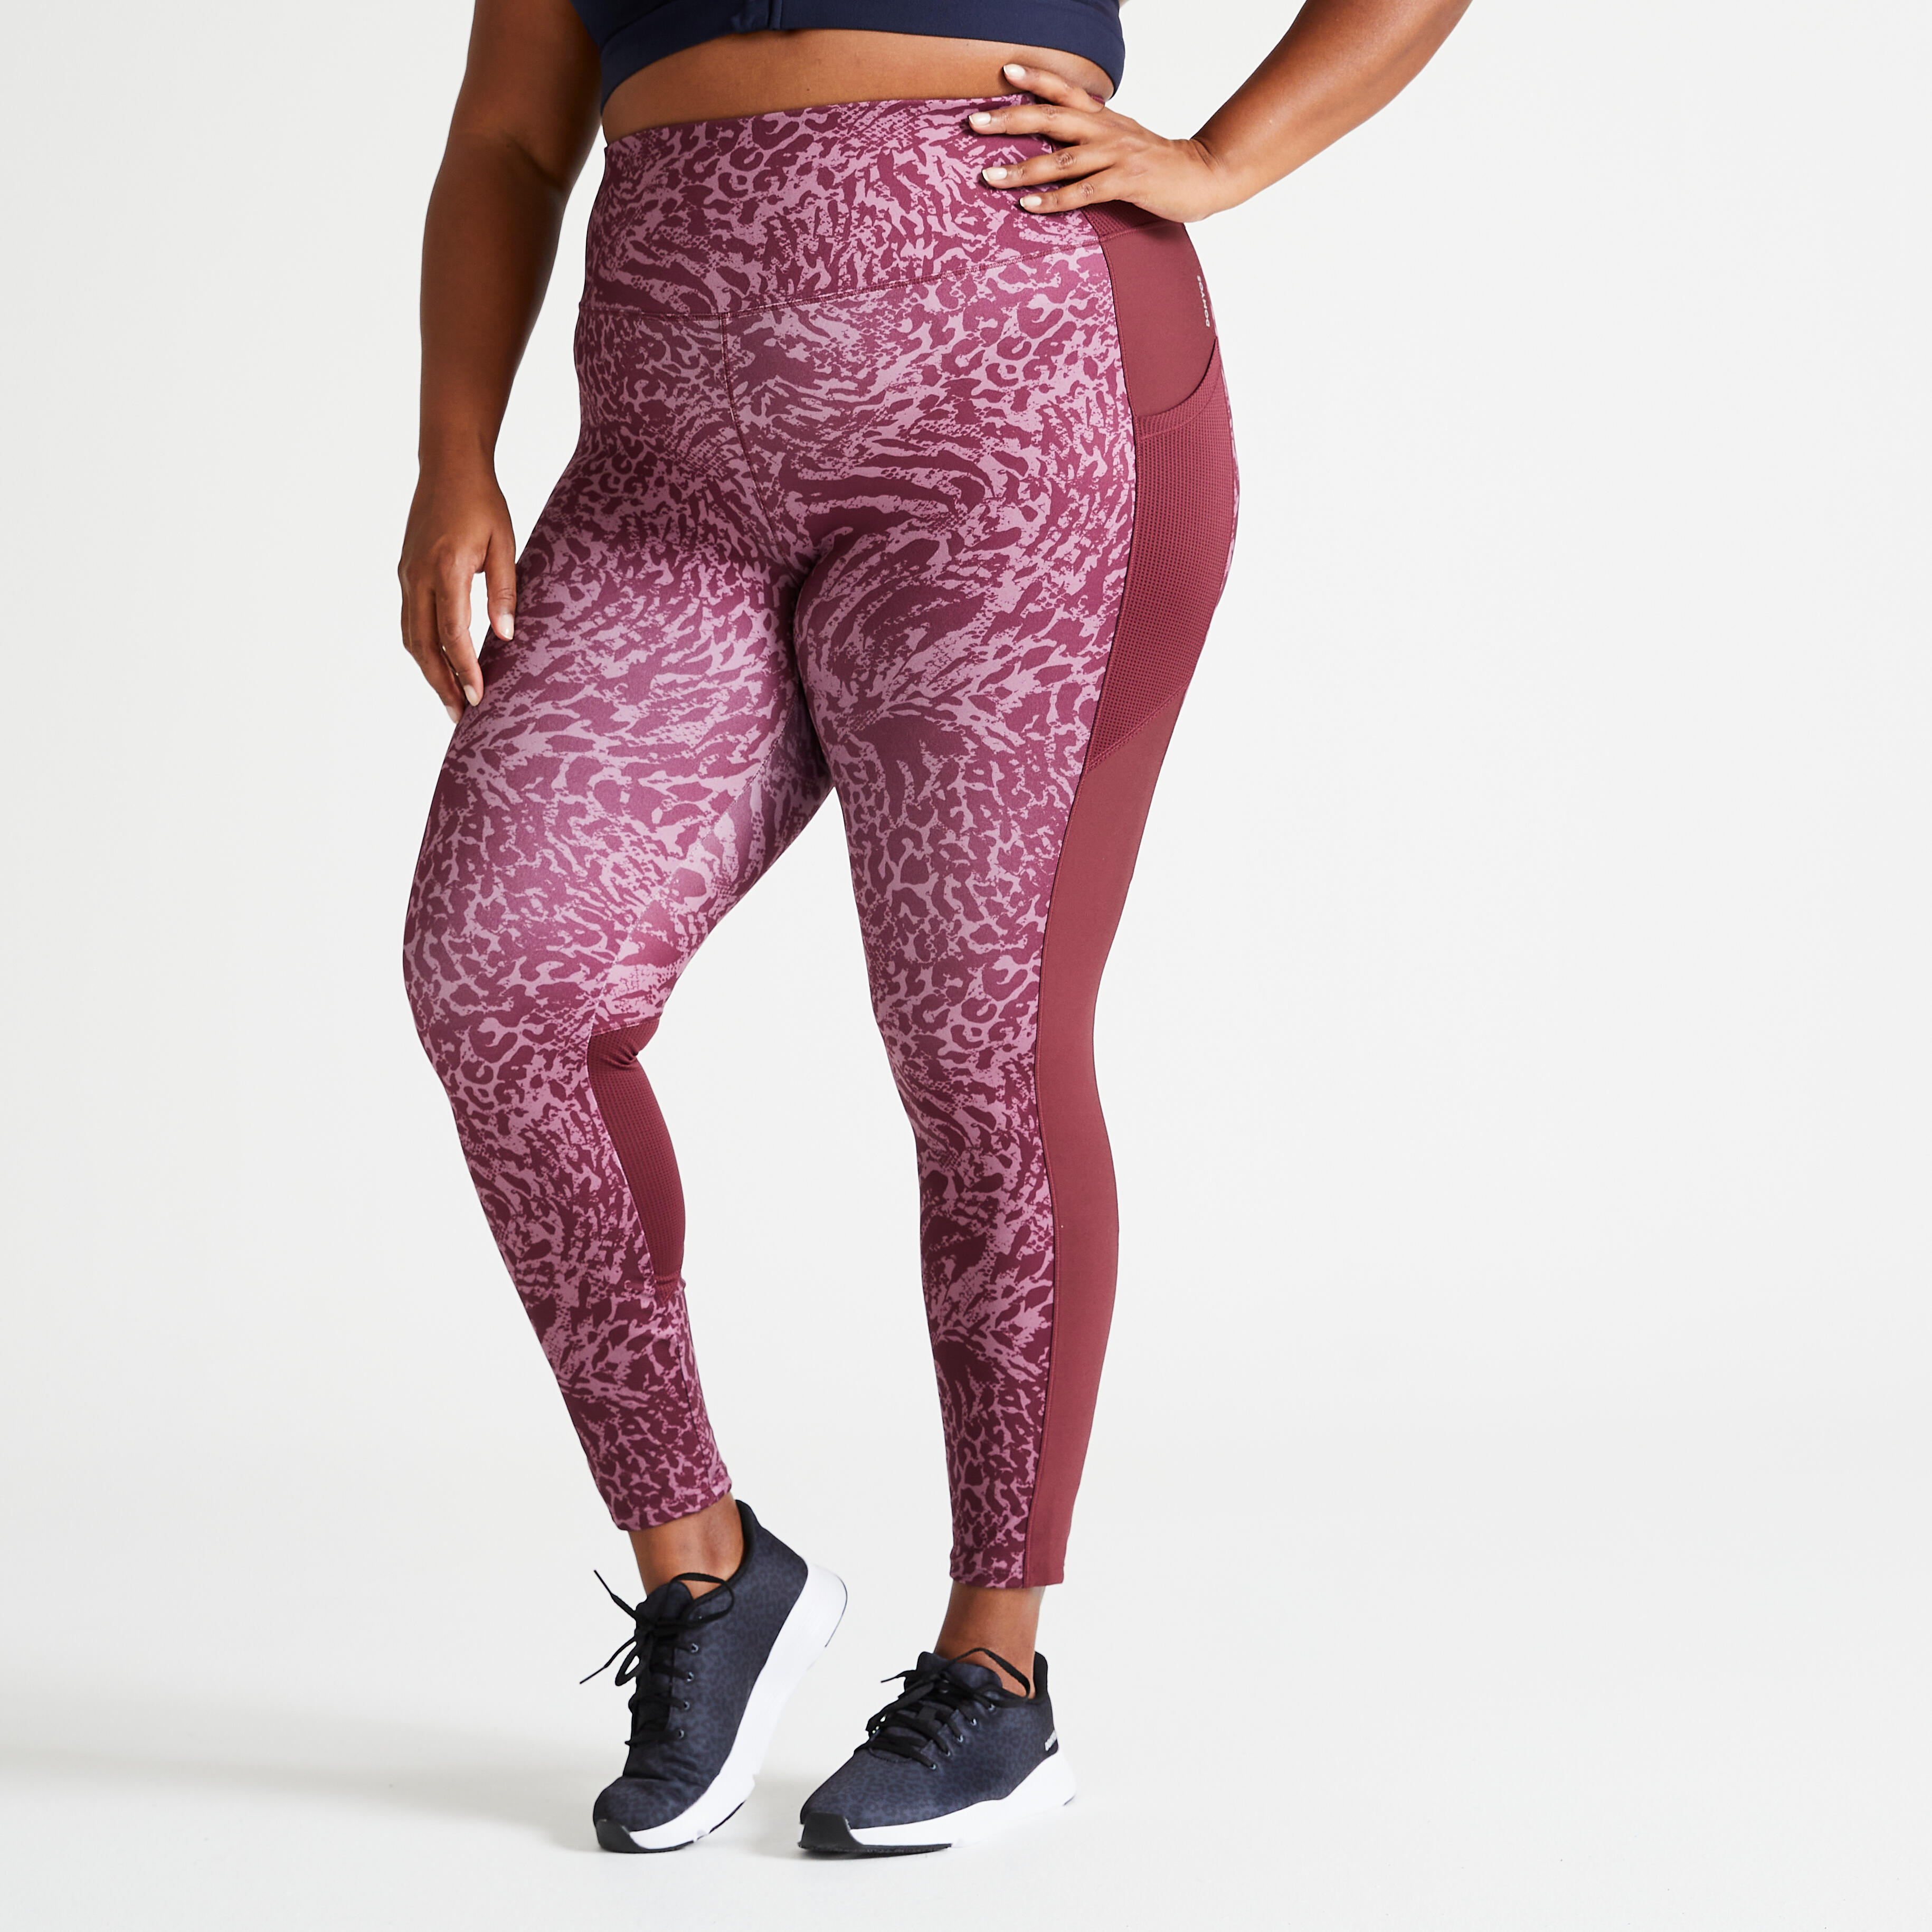 What is the pocket on the back of leggings for? - Quora